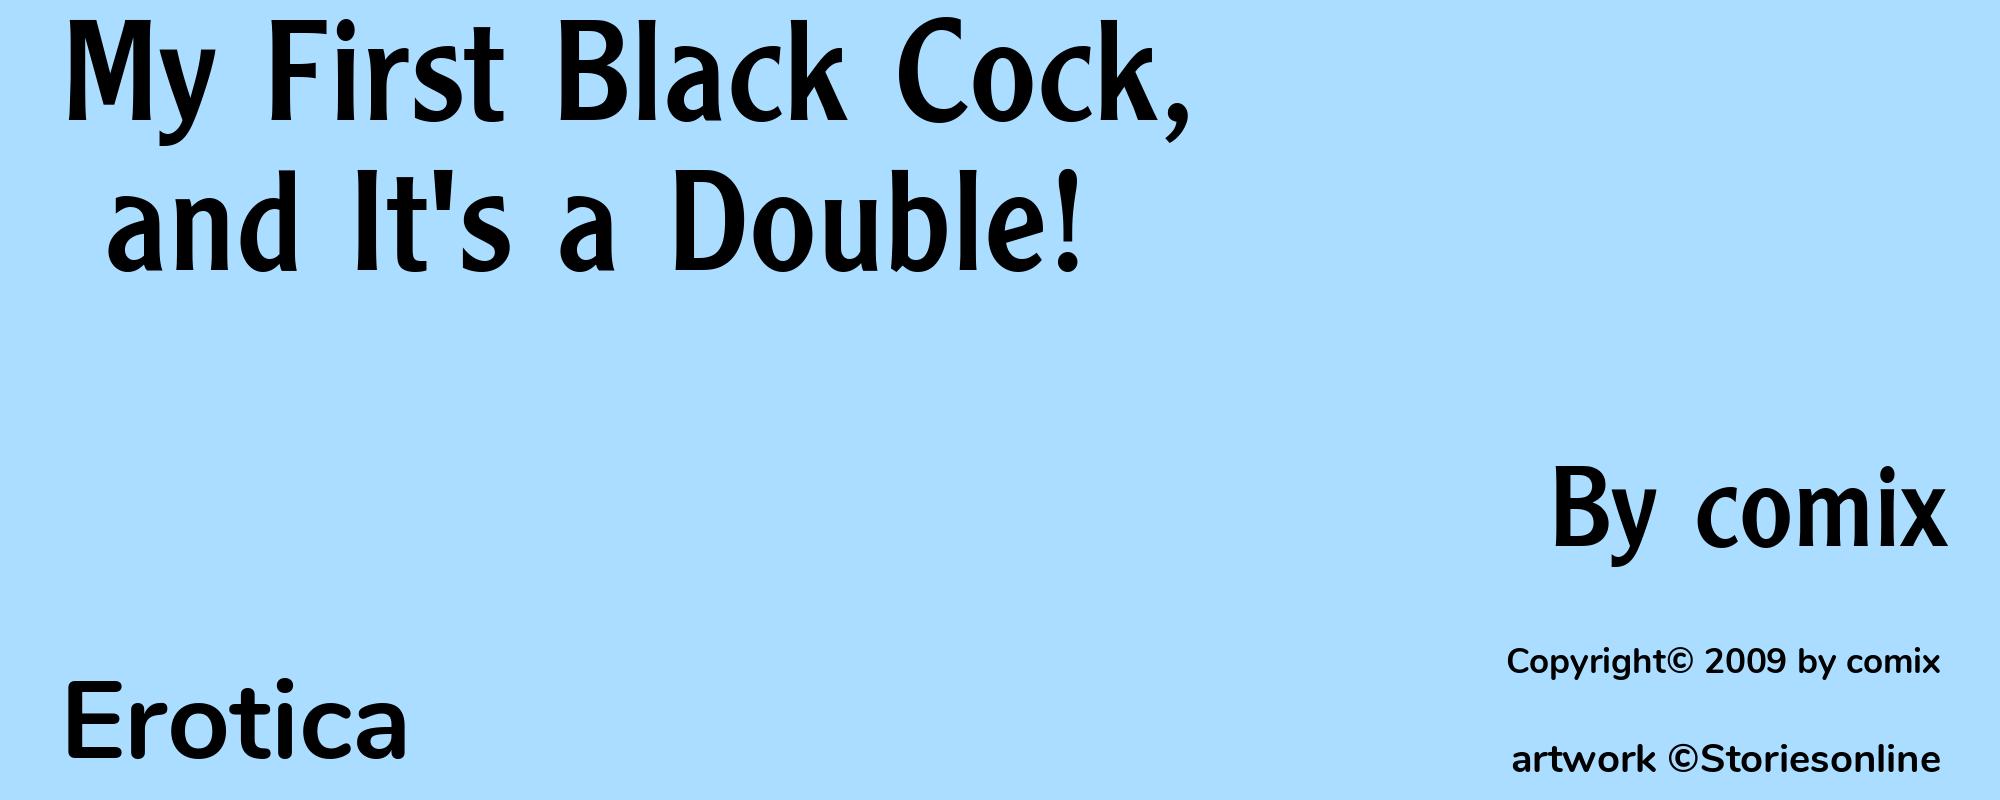 My First Black Cock, and It's a Double! - Cover